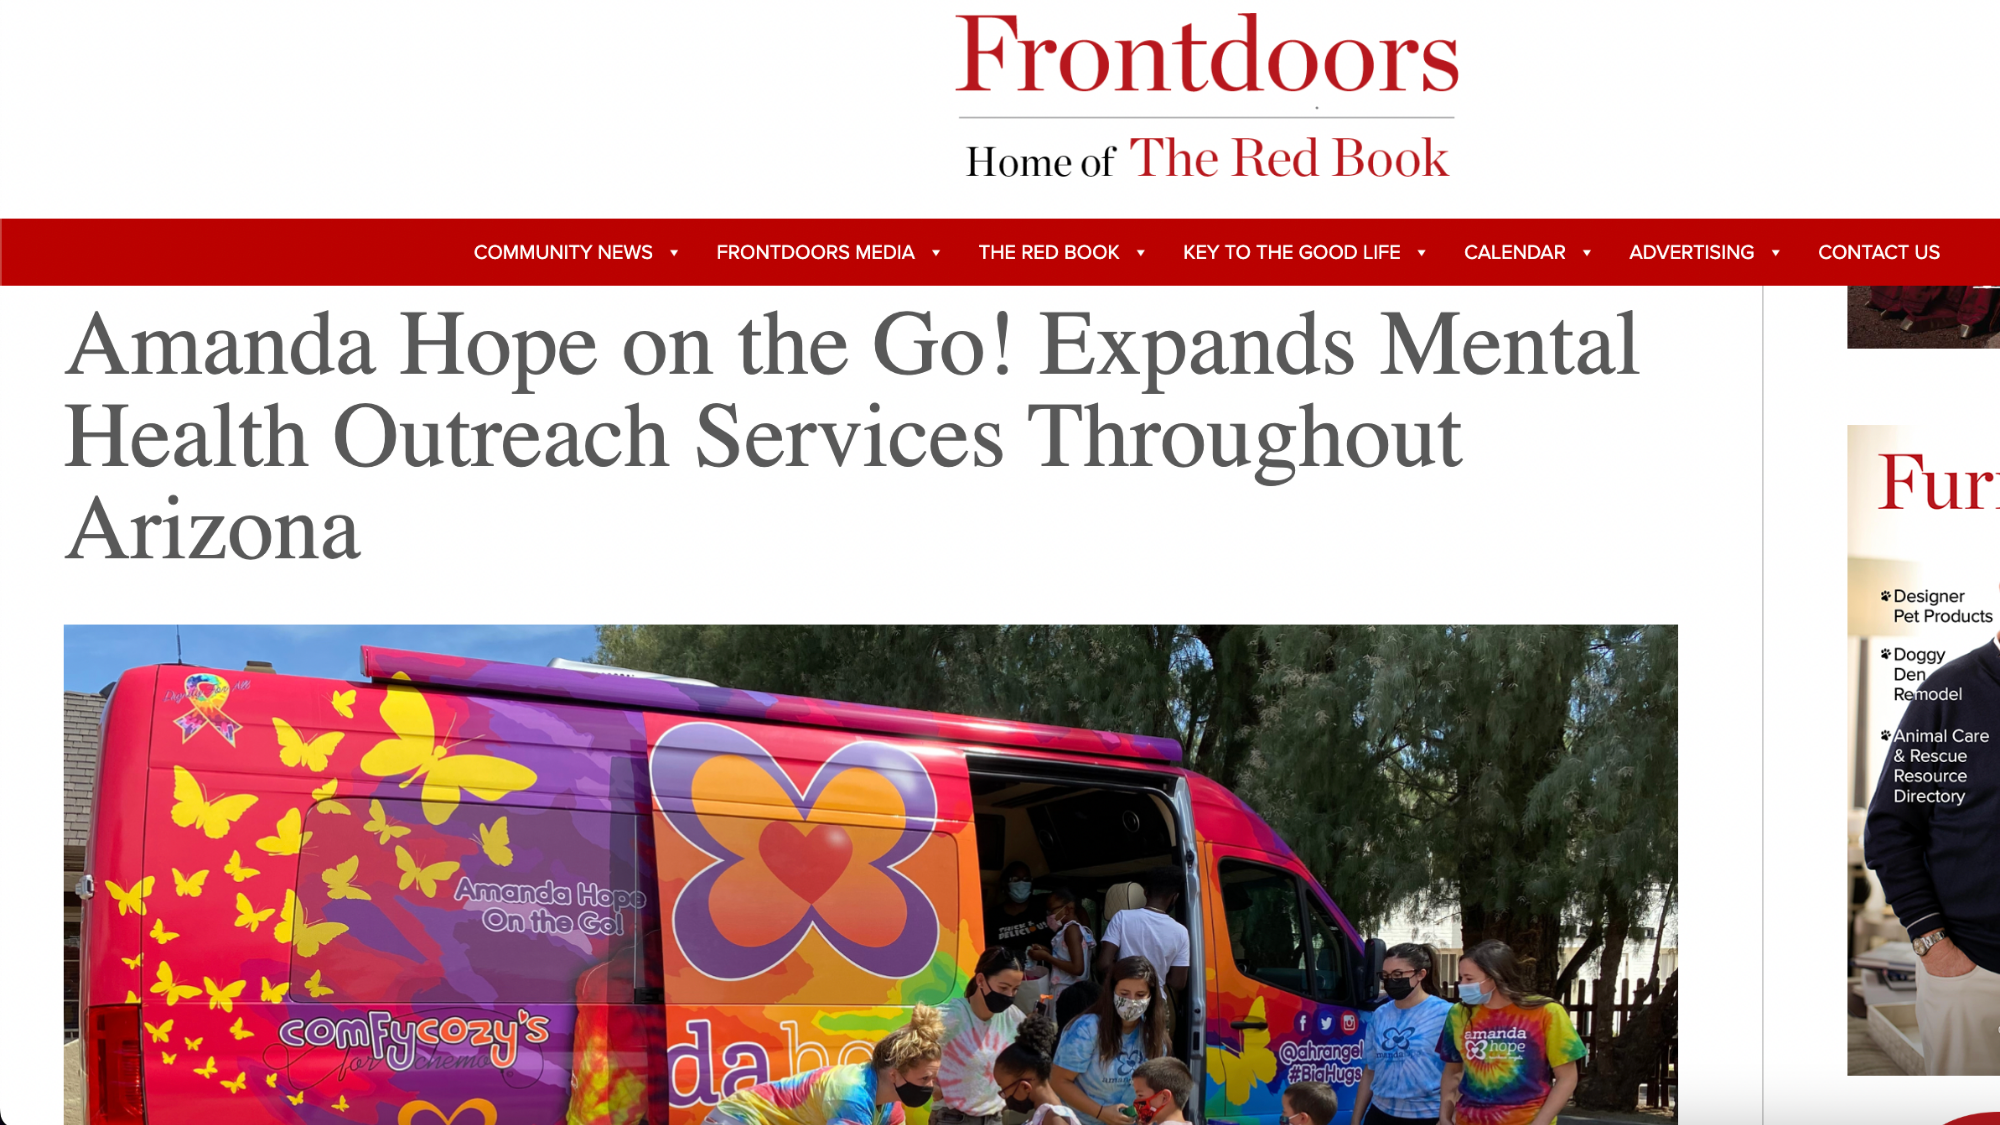 Frontdoors: Amanda Hope on the Go! Expands Mental Health Outreach Services Throughout Arizona (Copy)